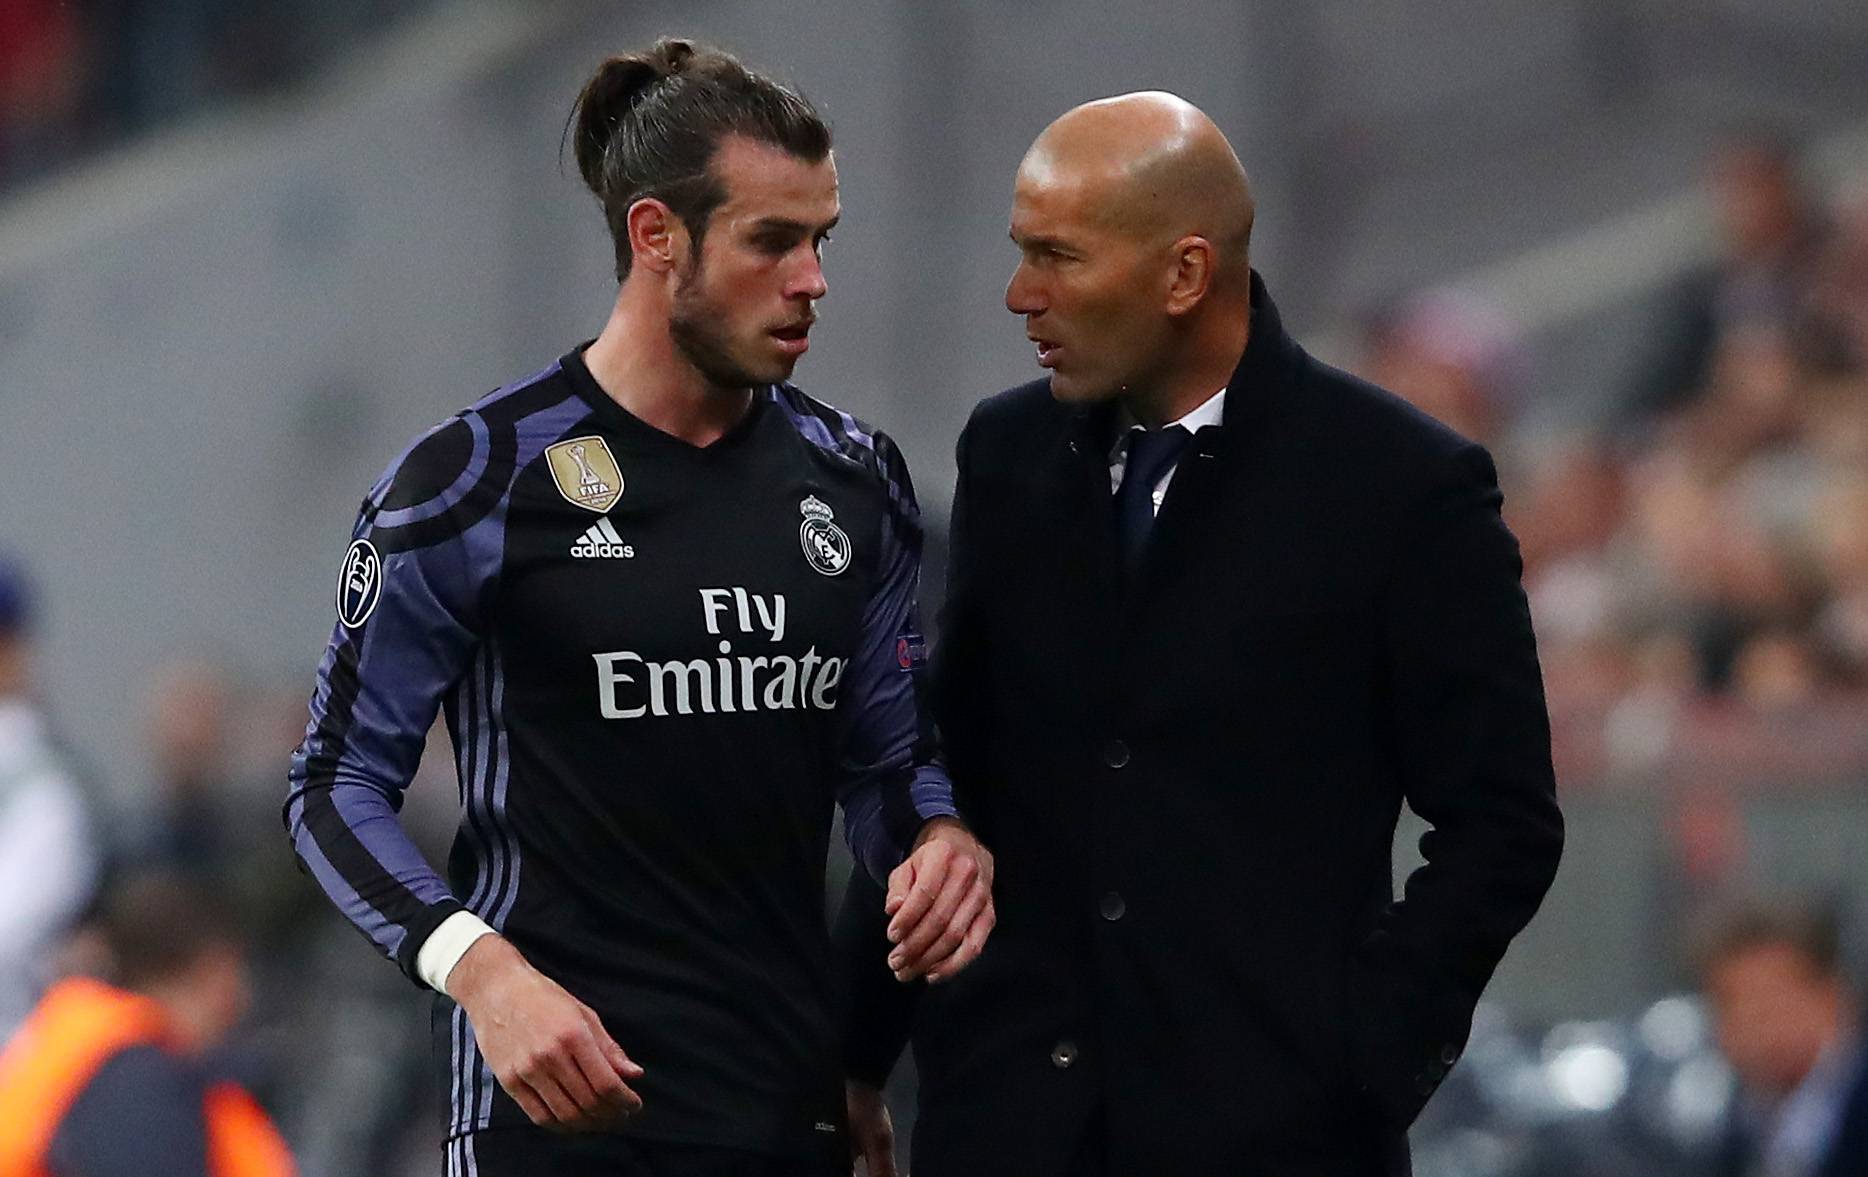 Real Madrid's Gareth Bale speaks to Real Madrid coach Zinedine Zidane as he is substituted off